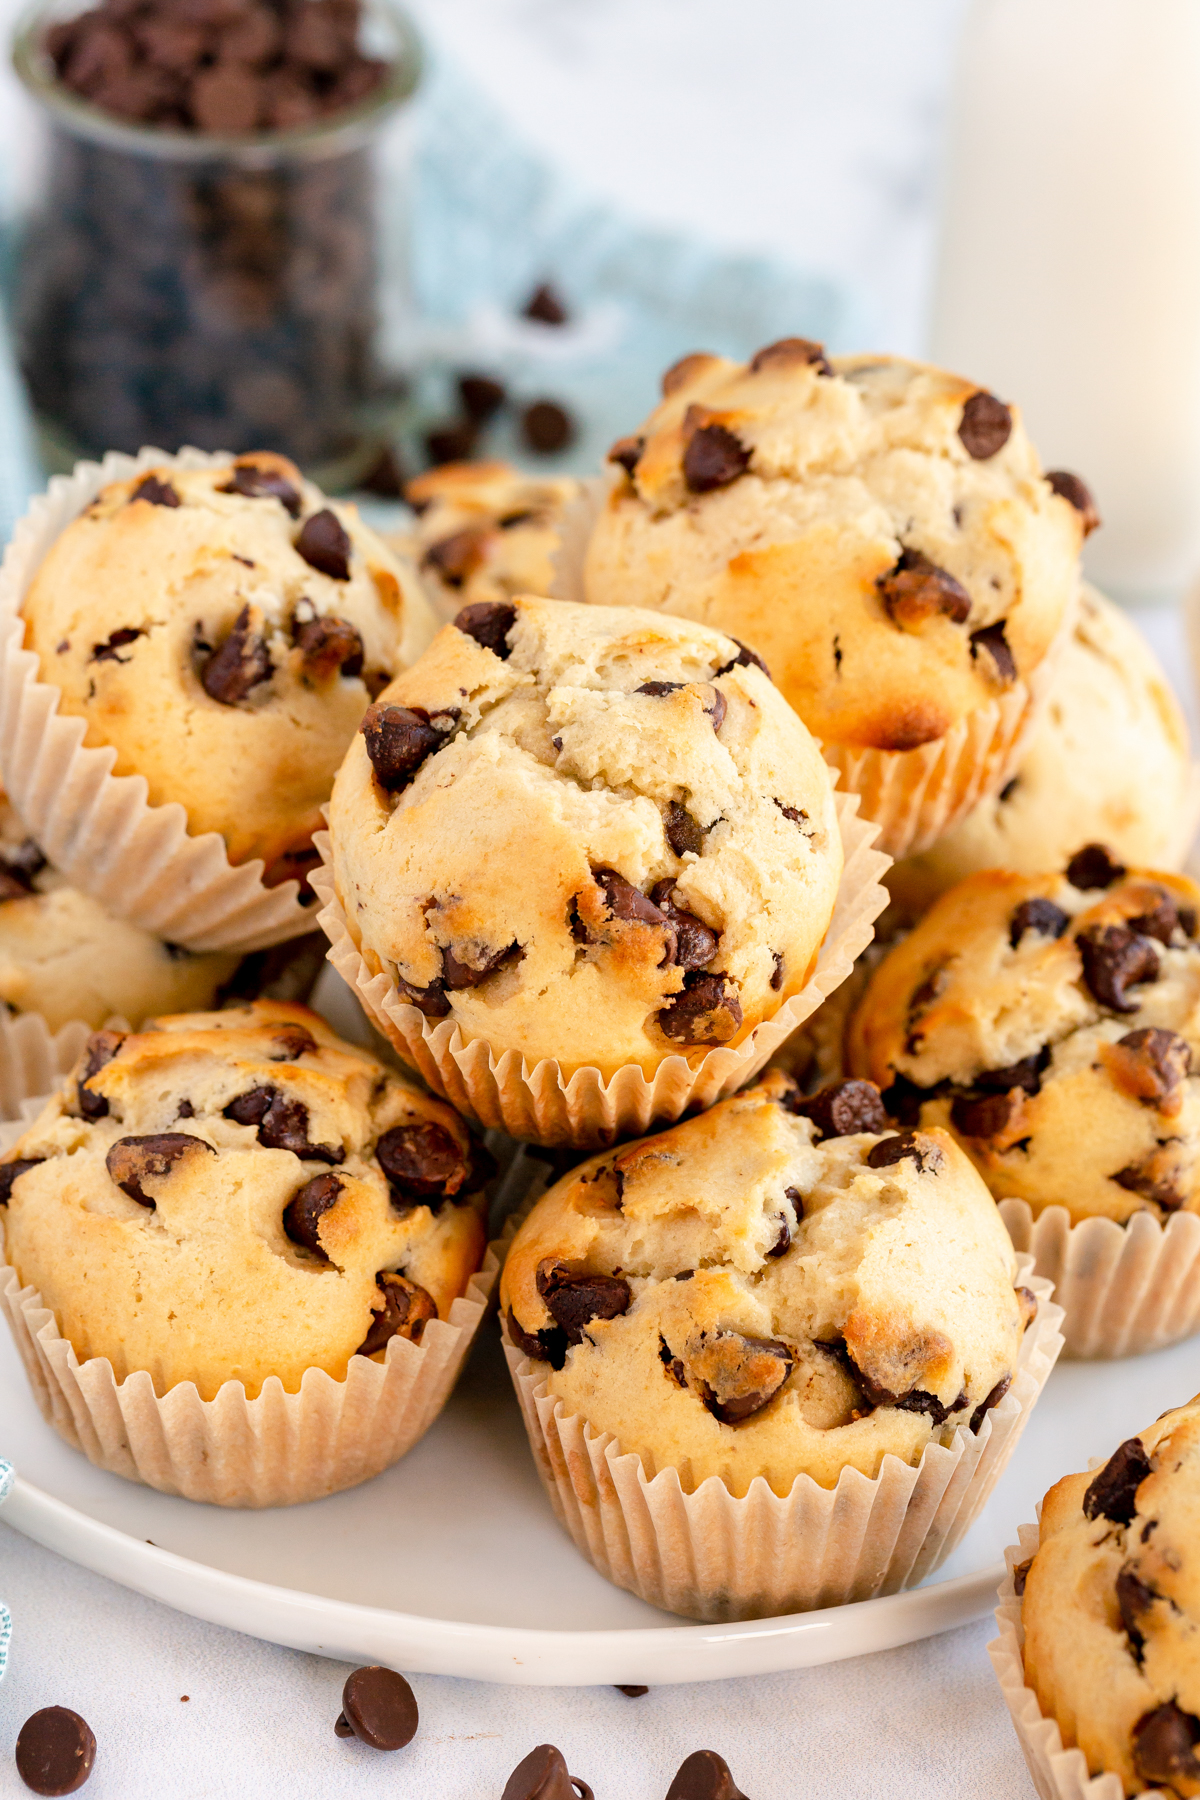 Plate full of chocolate chip muffins